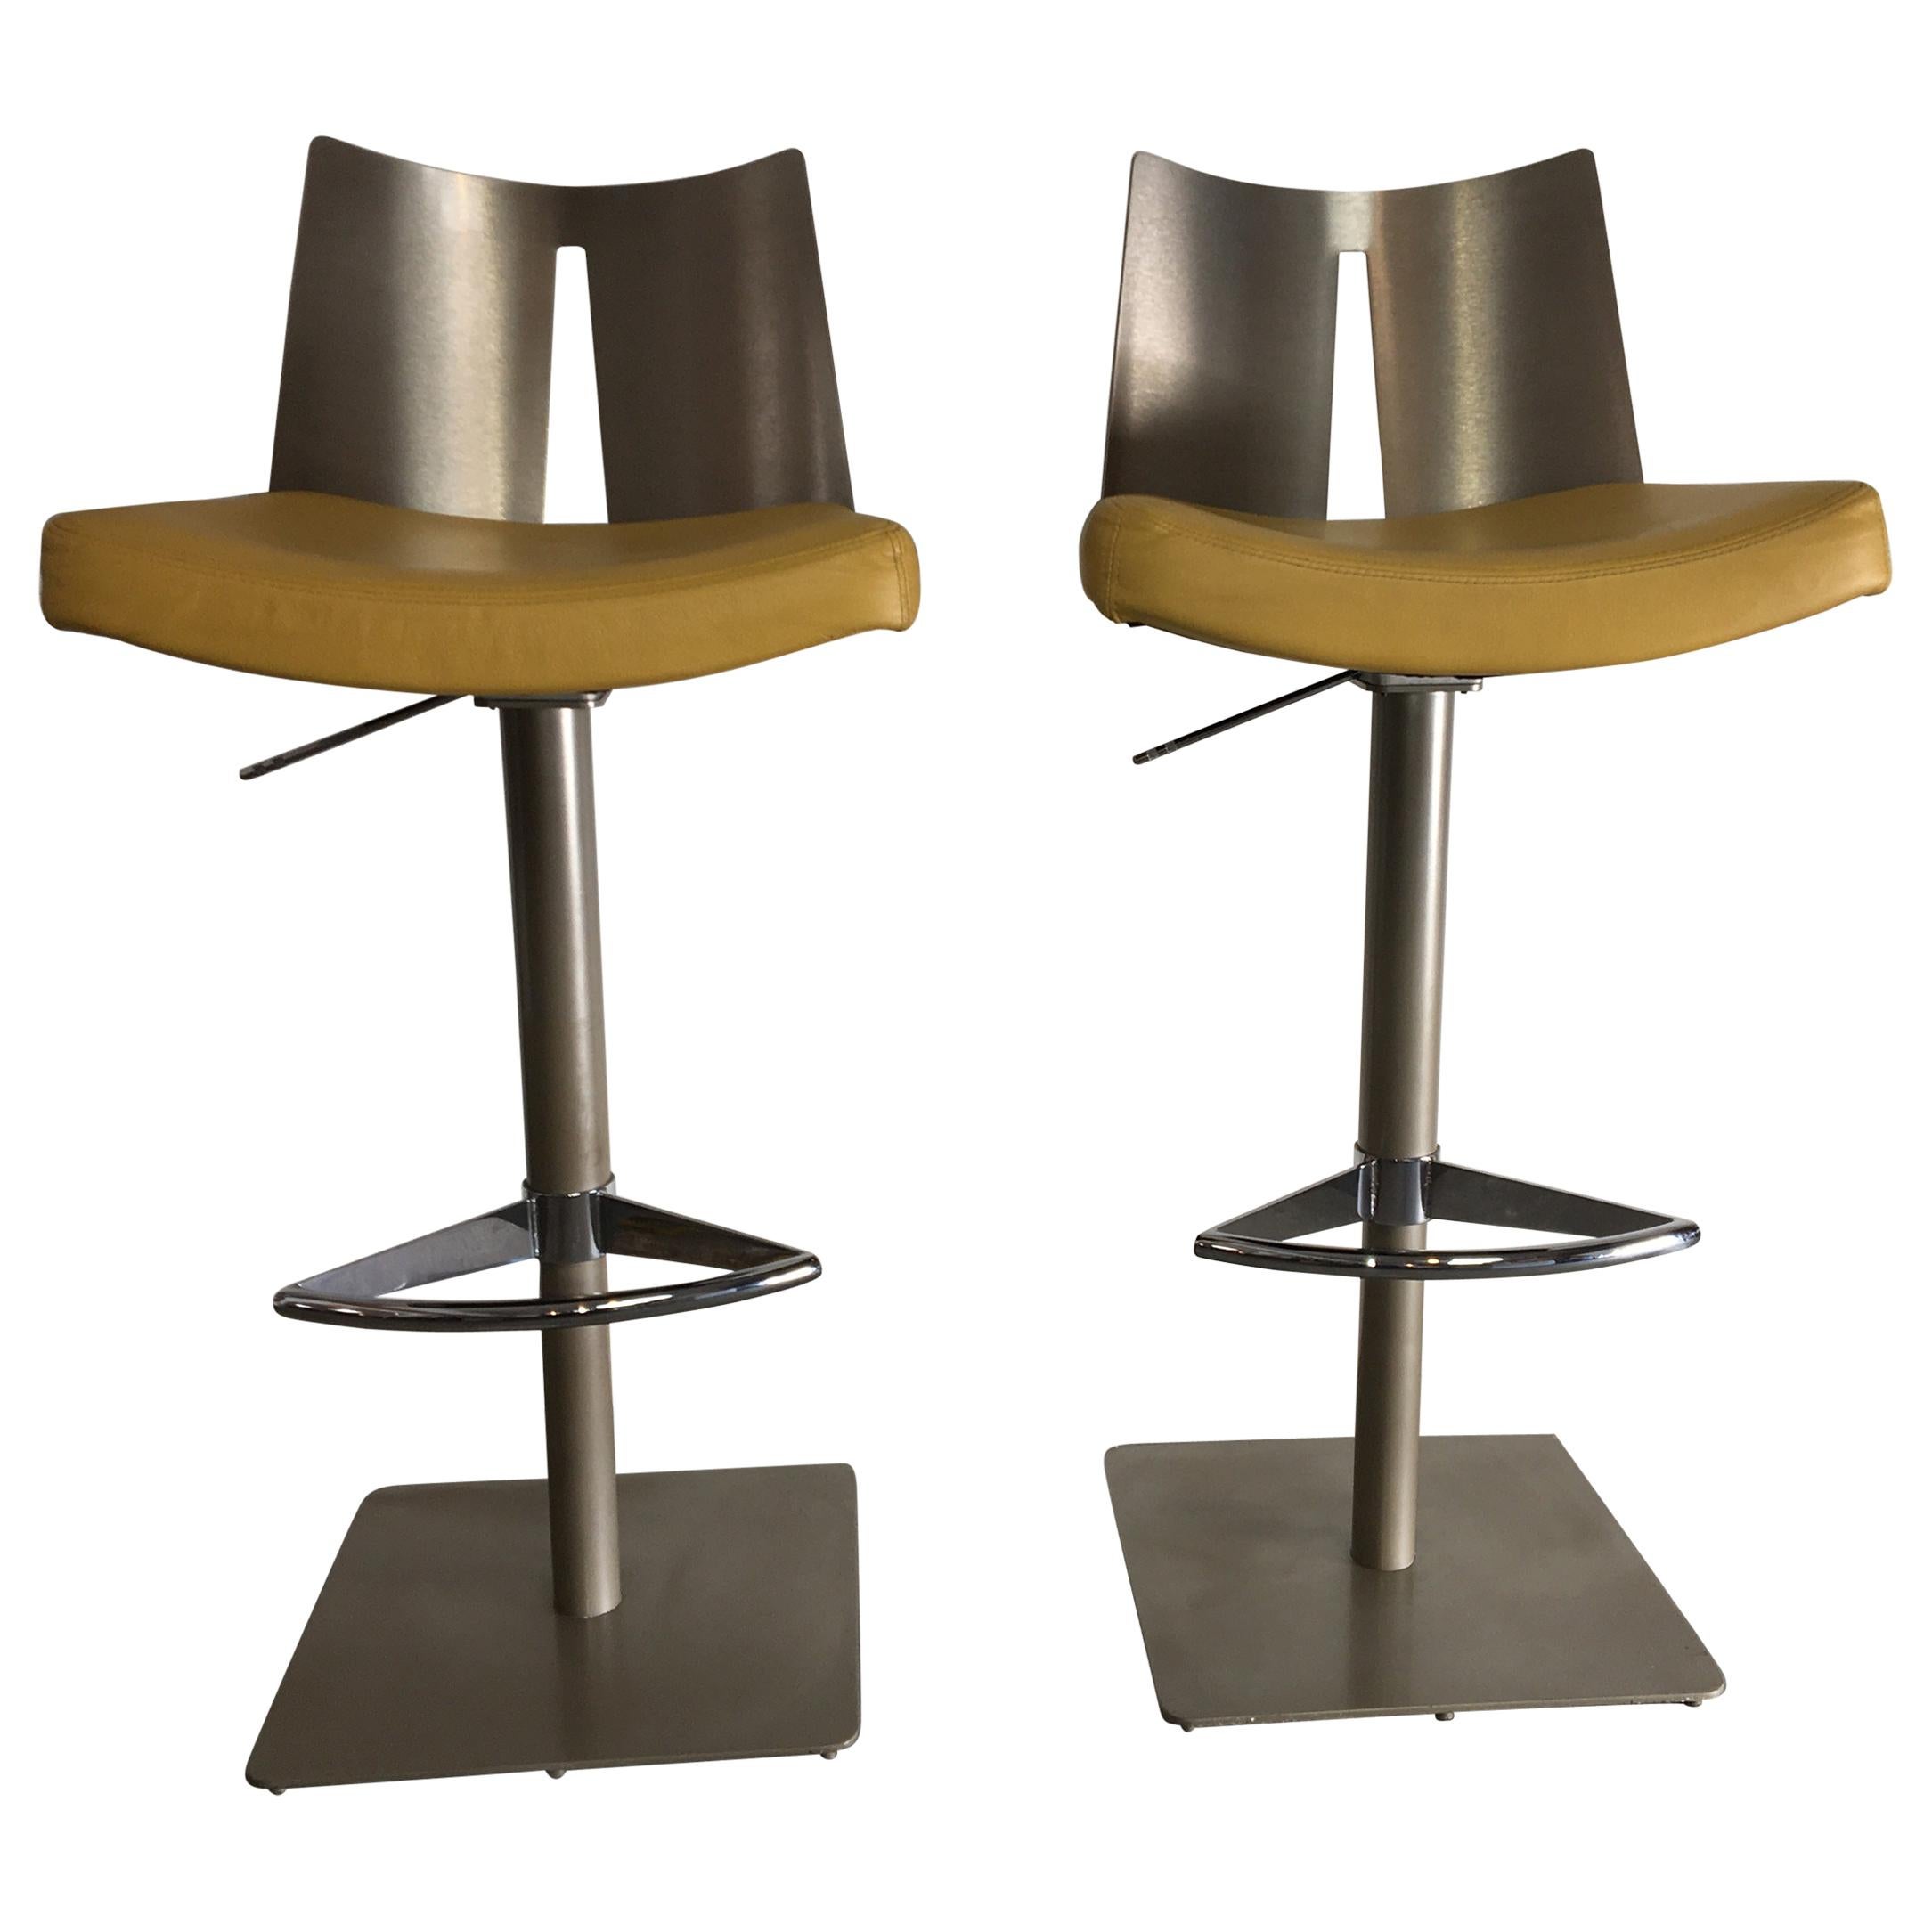 Pair of Brushed Steel Swivel and Adjustable Barstools or Countertop stools